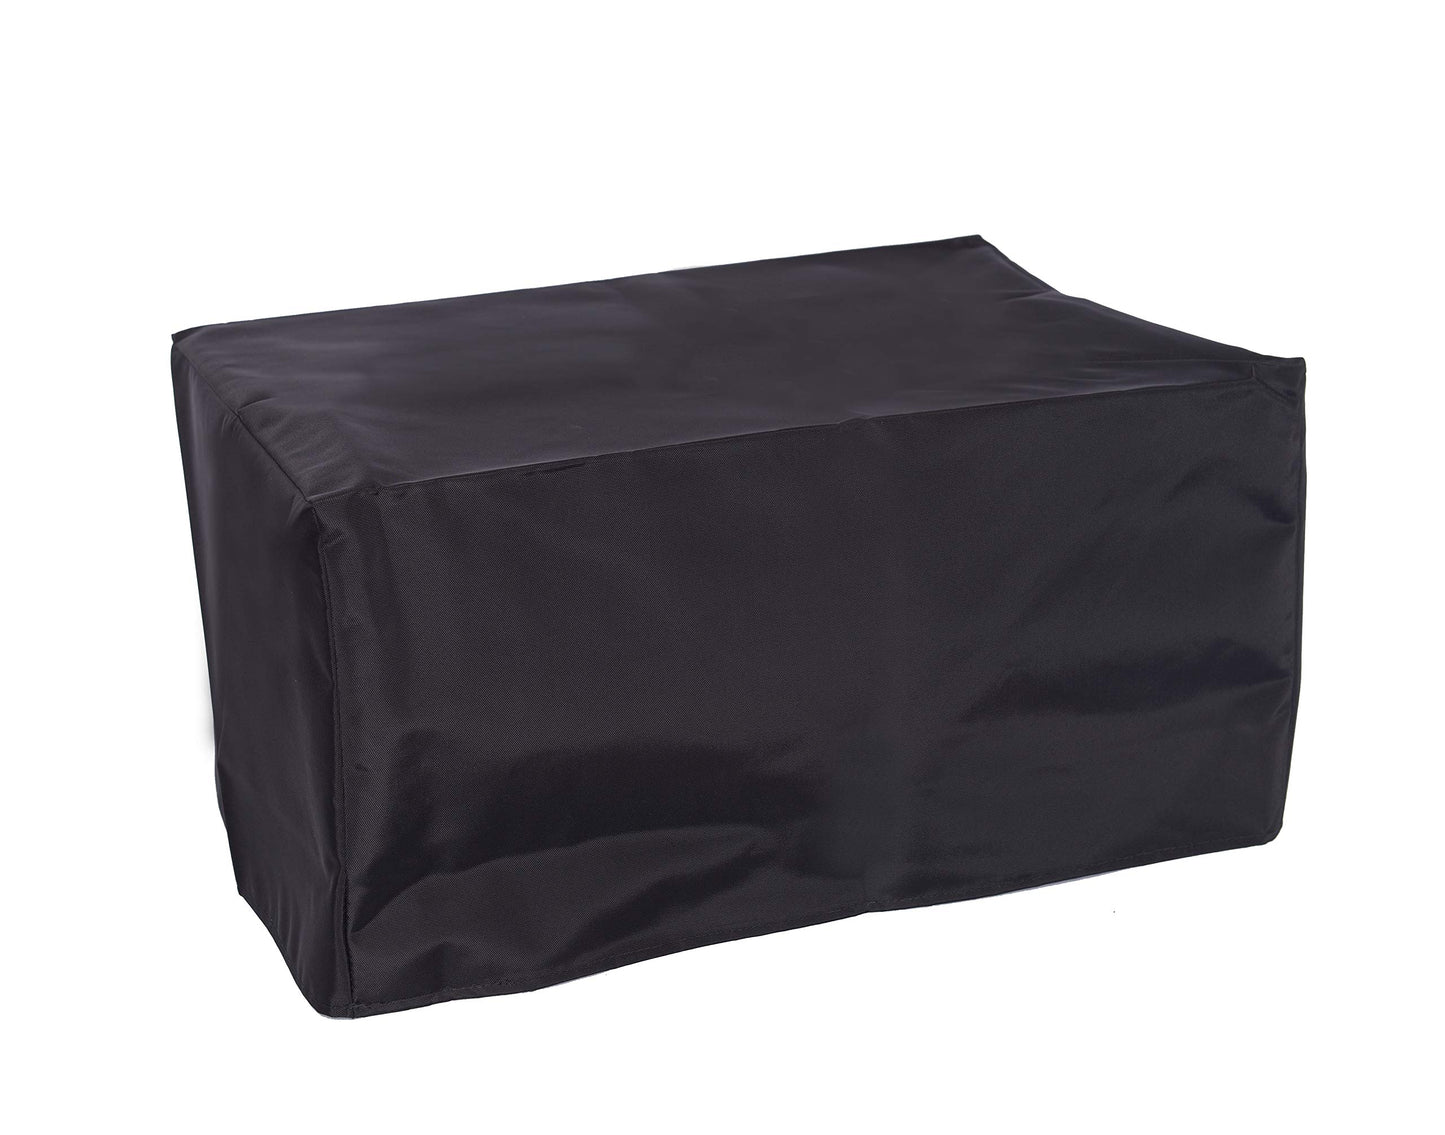 The Perfect Dust Cover, Black Nylon Cover for Lexmark B2338dw Monochrome Laser Printer, Anti Static Waterproof and Double Stitched Cover by The Perfect Dust Cover LLC